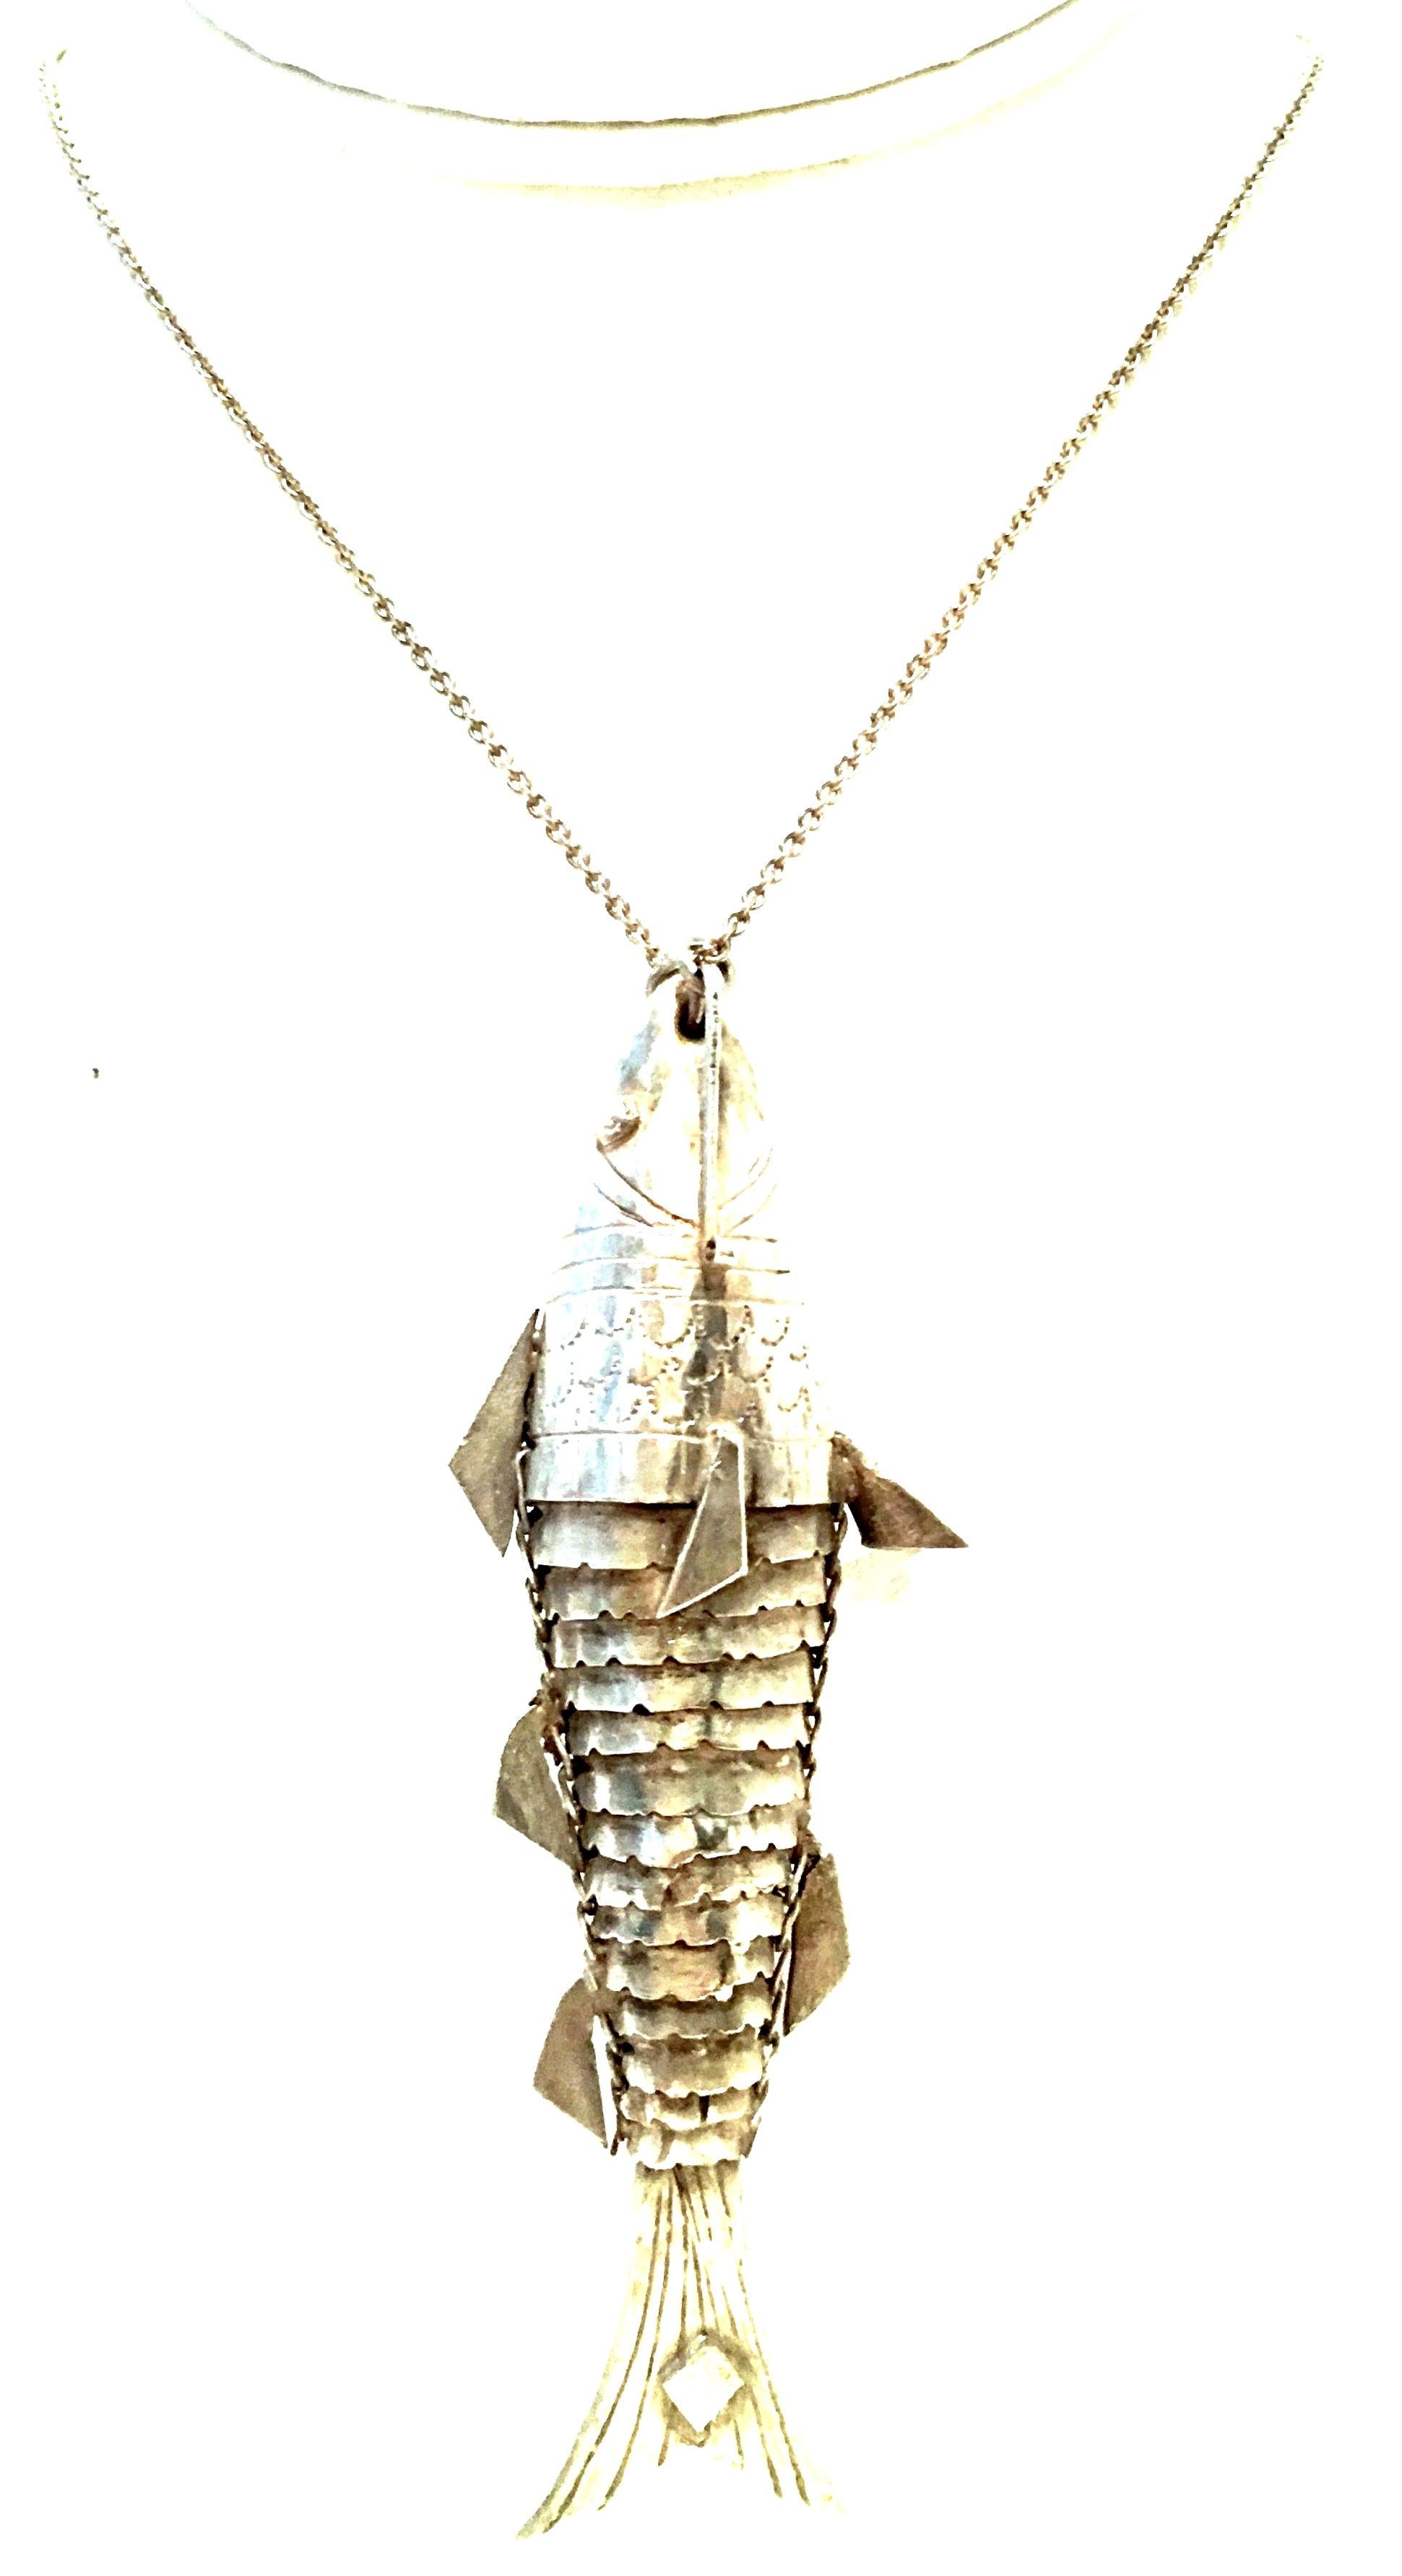 20th Century Sterling Silver Articulating Fish Pendant Necklace. Features a sterling silver chain link necklace with a large articulating fish pendant and three aqua marine beads at the clasp. The fish pendant measures approximately, 4.25